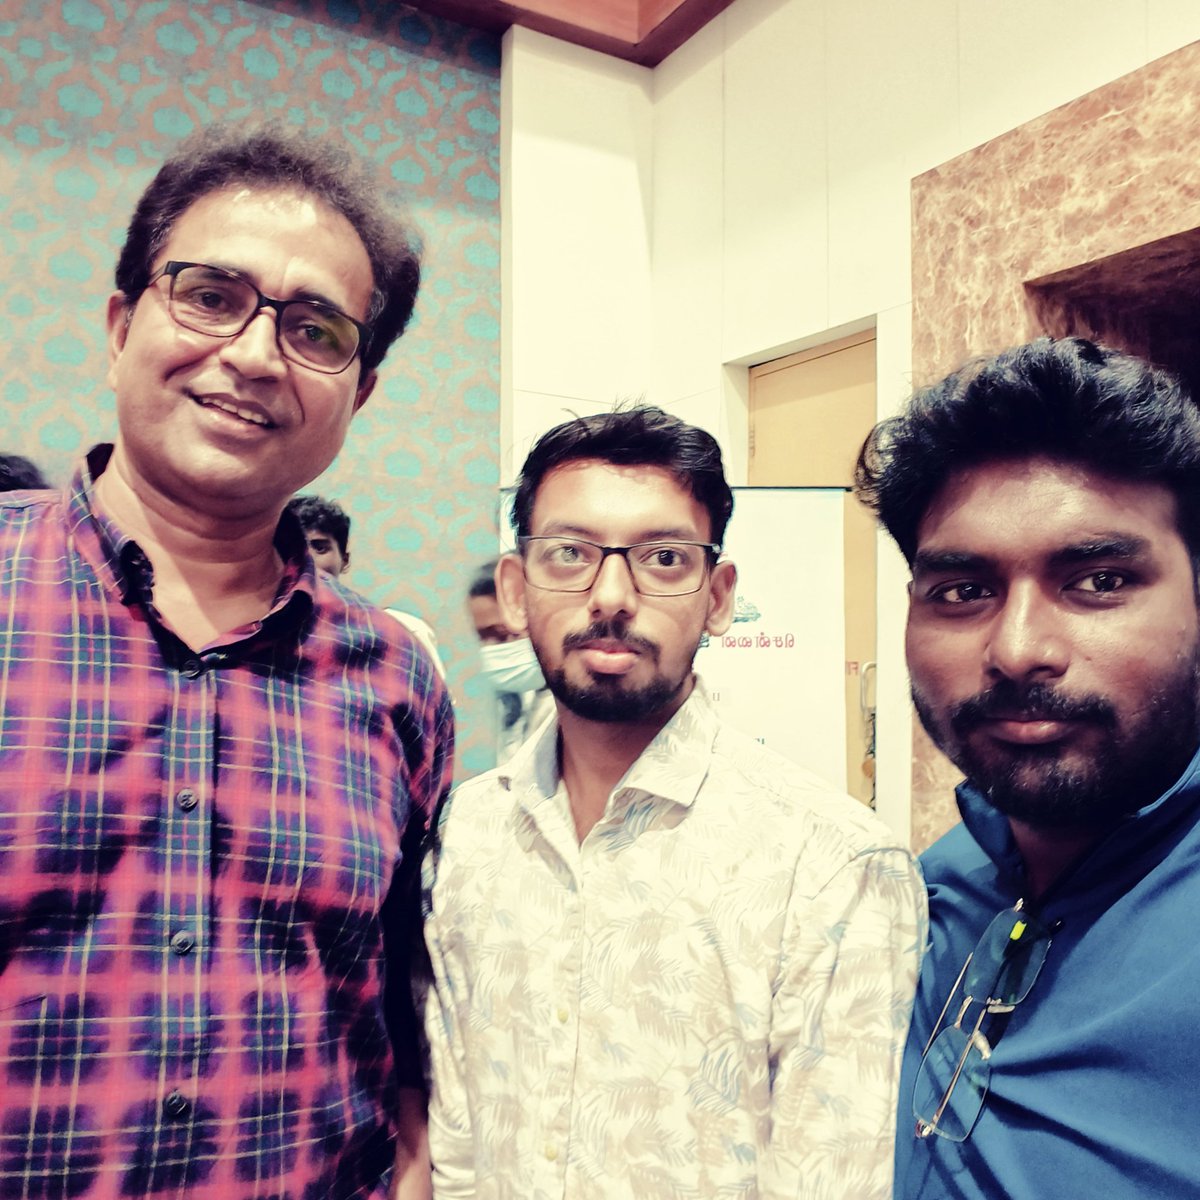 I am very pleased to meet you #ShajiChen sir